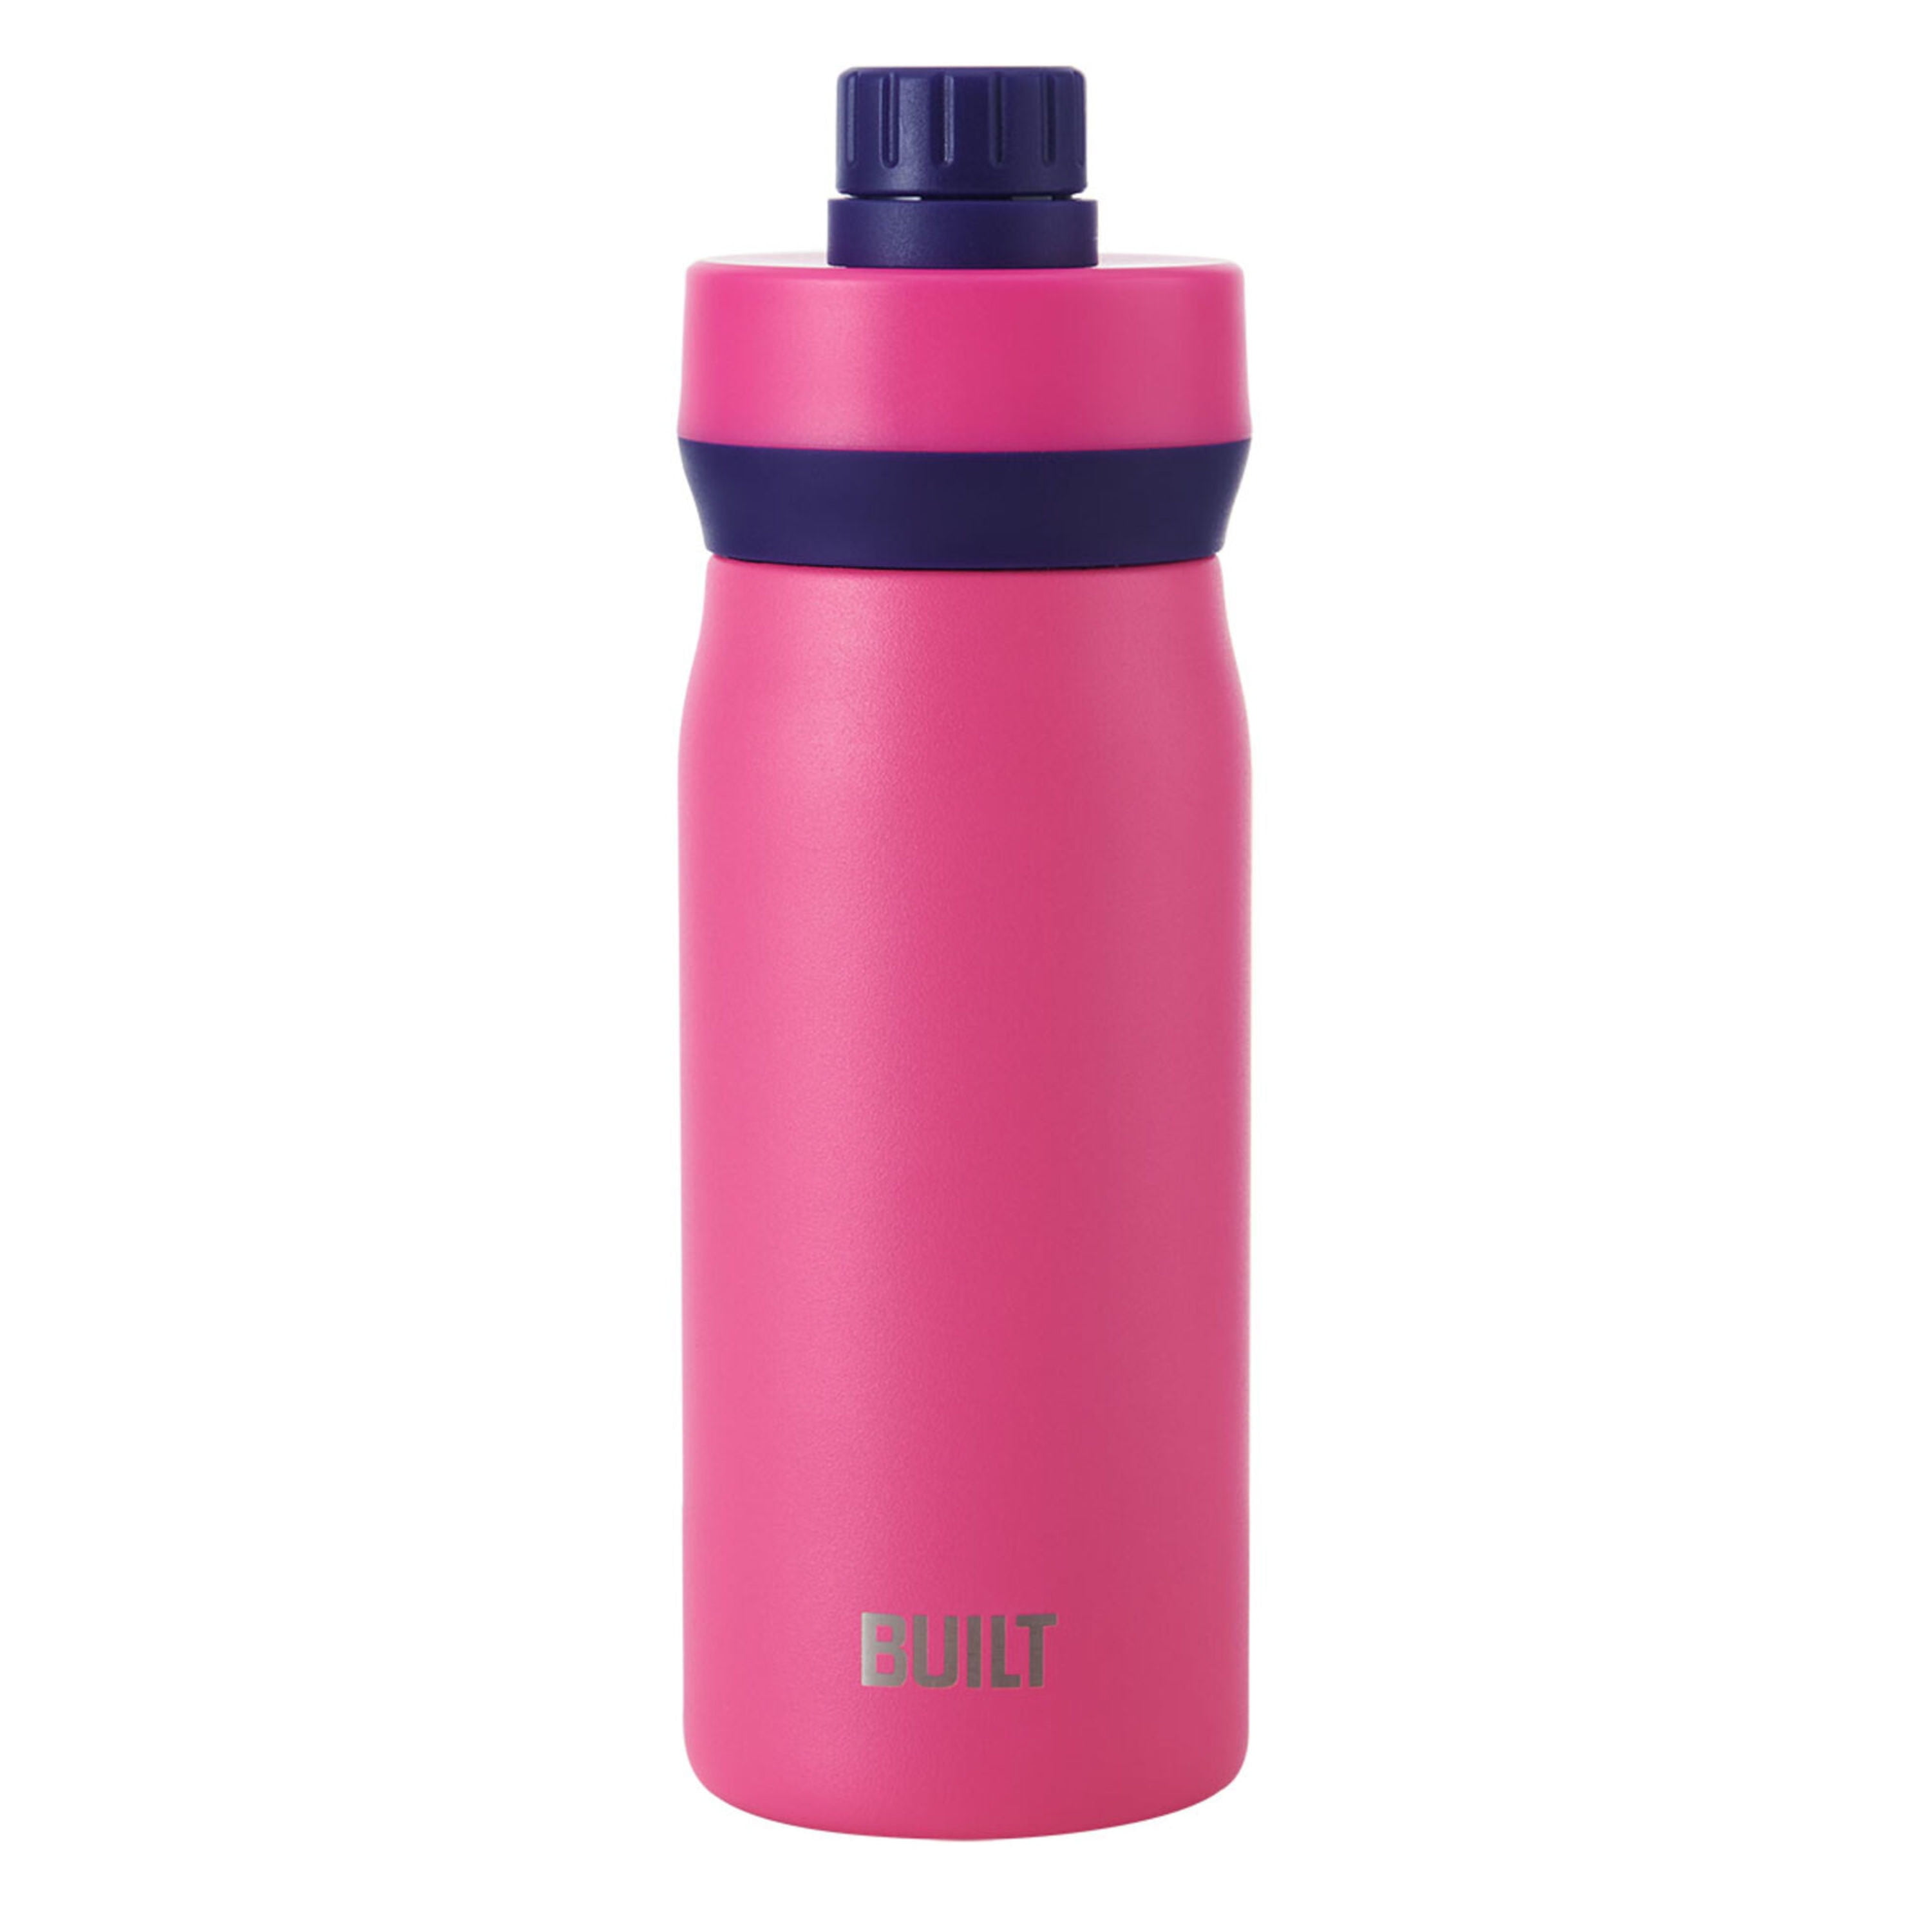 Liberty 20 oz. Berry Insulated Stainless Steel Water Bottle with D-Ring Lid, Pink